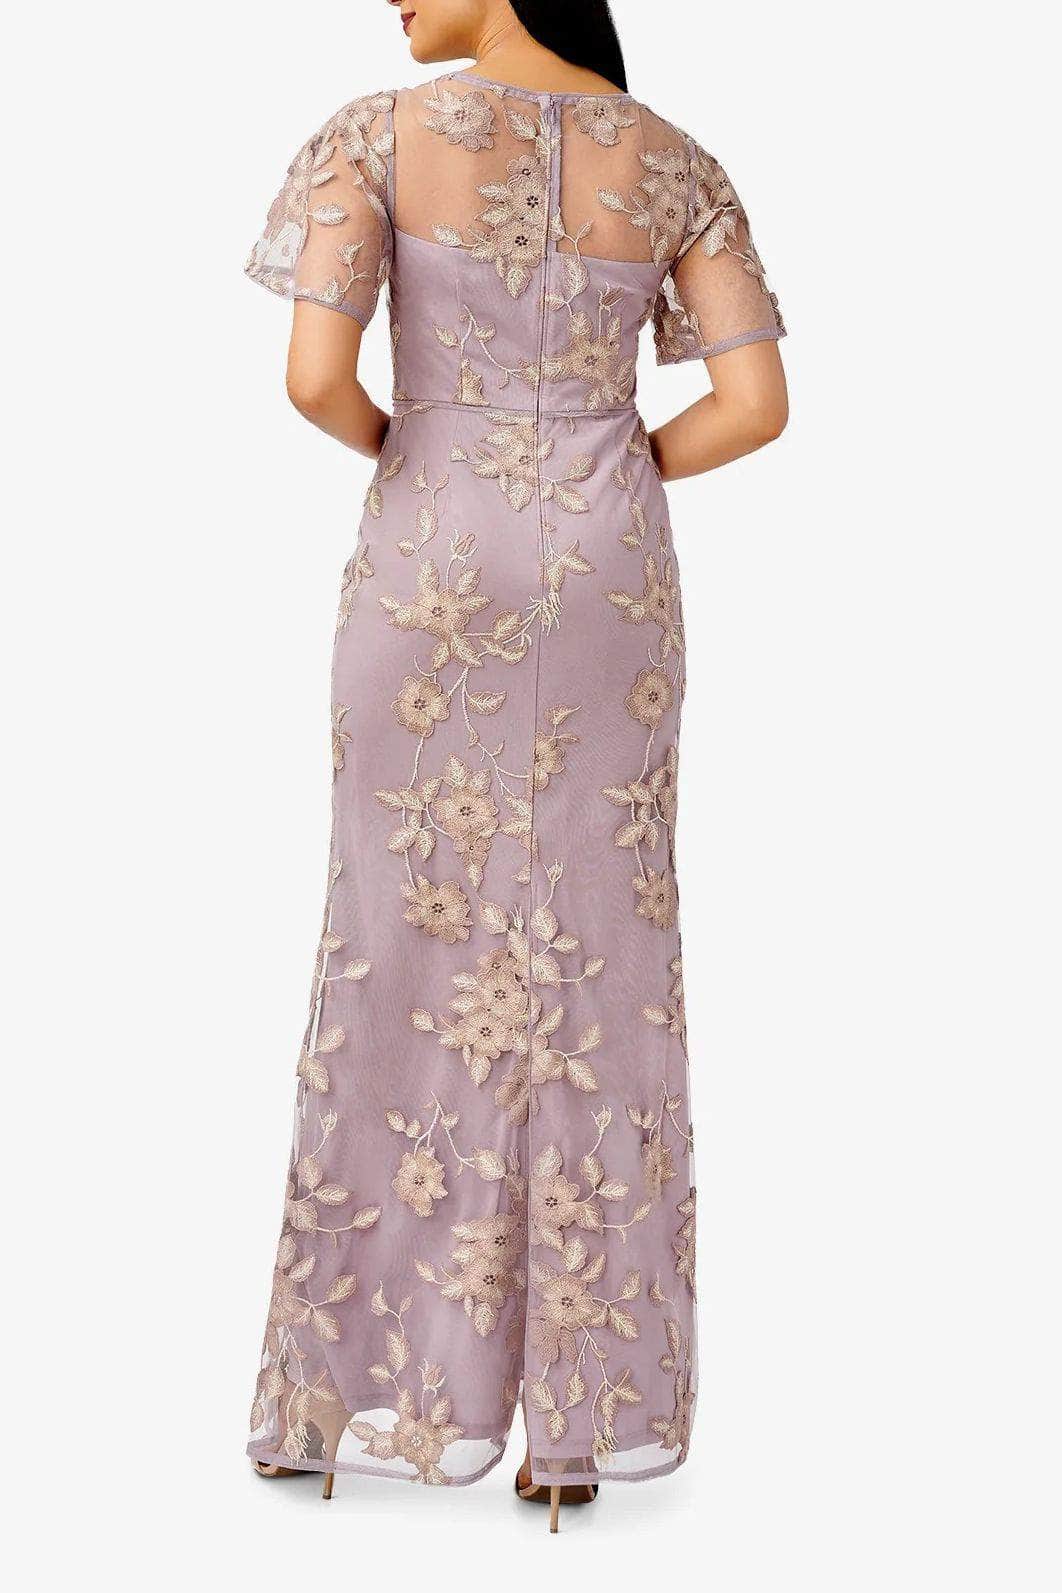 Adrianna Papell AP1E209757 - Illusion Floral Embroidery Long Dress Special Occasion Dress